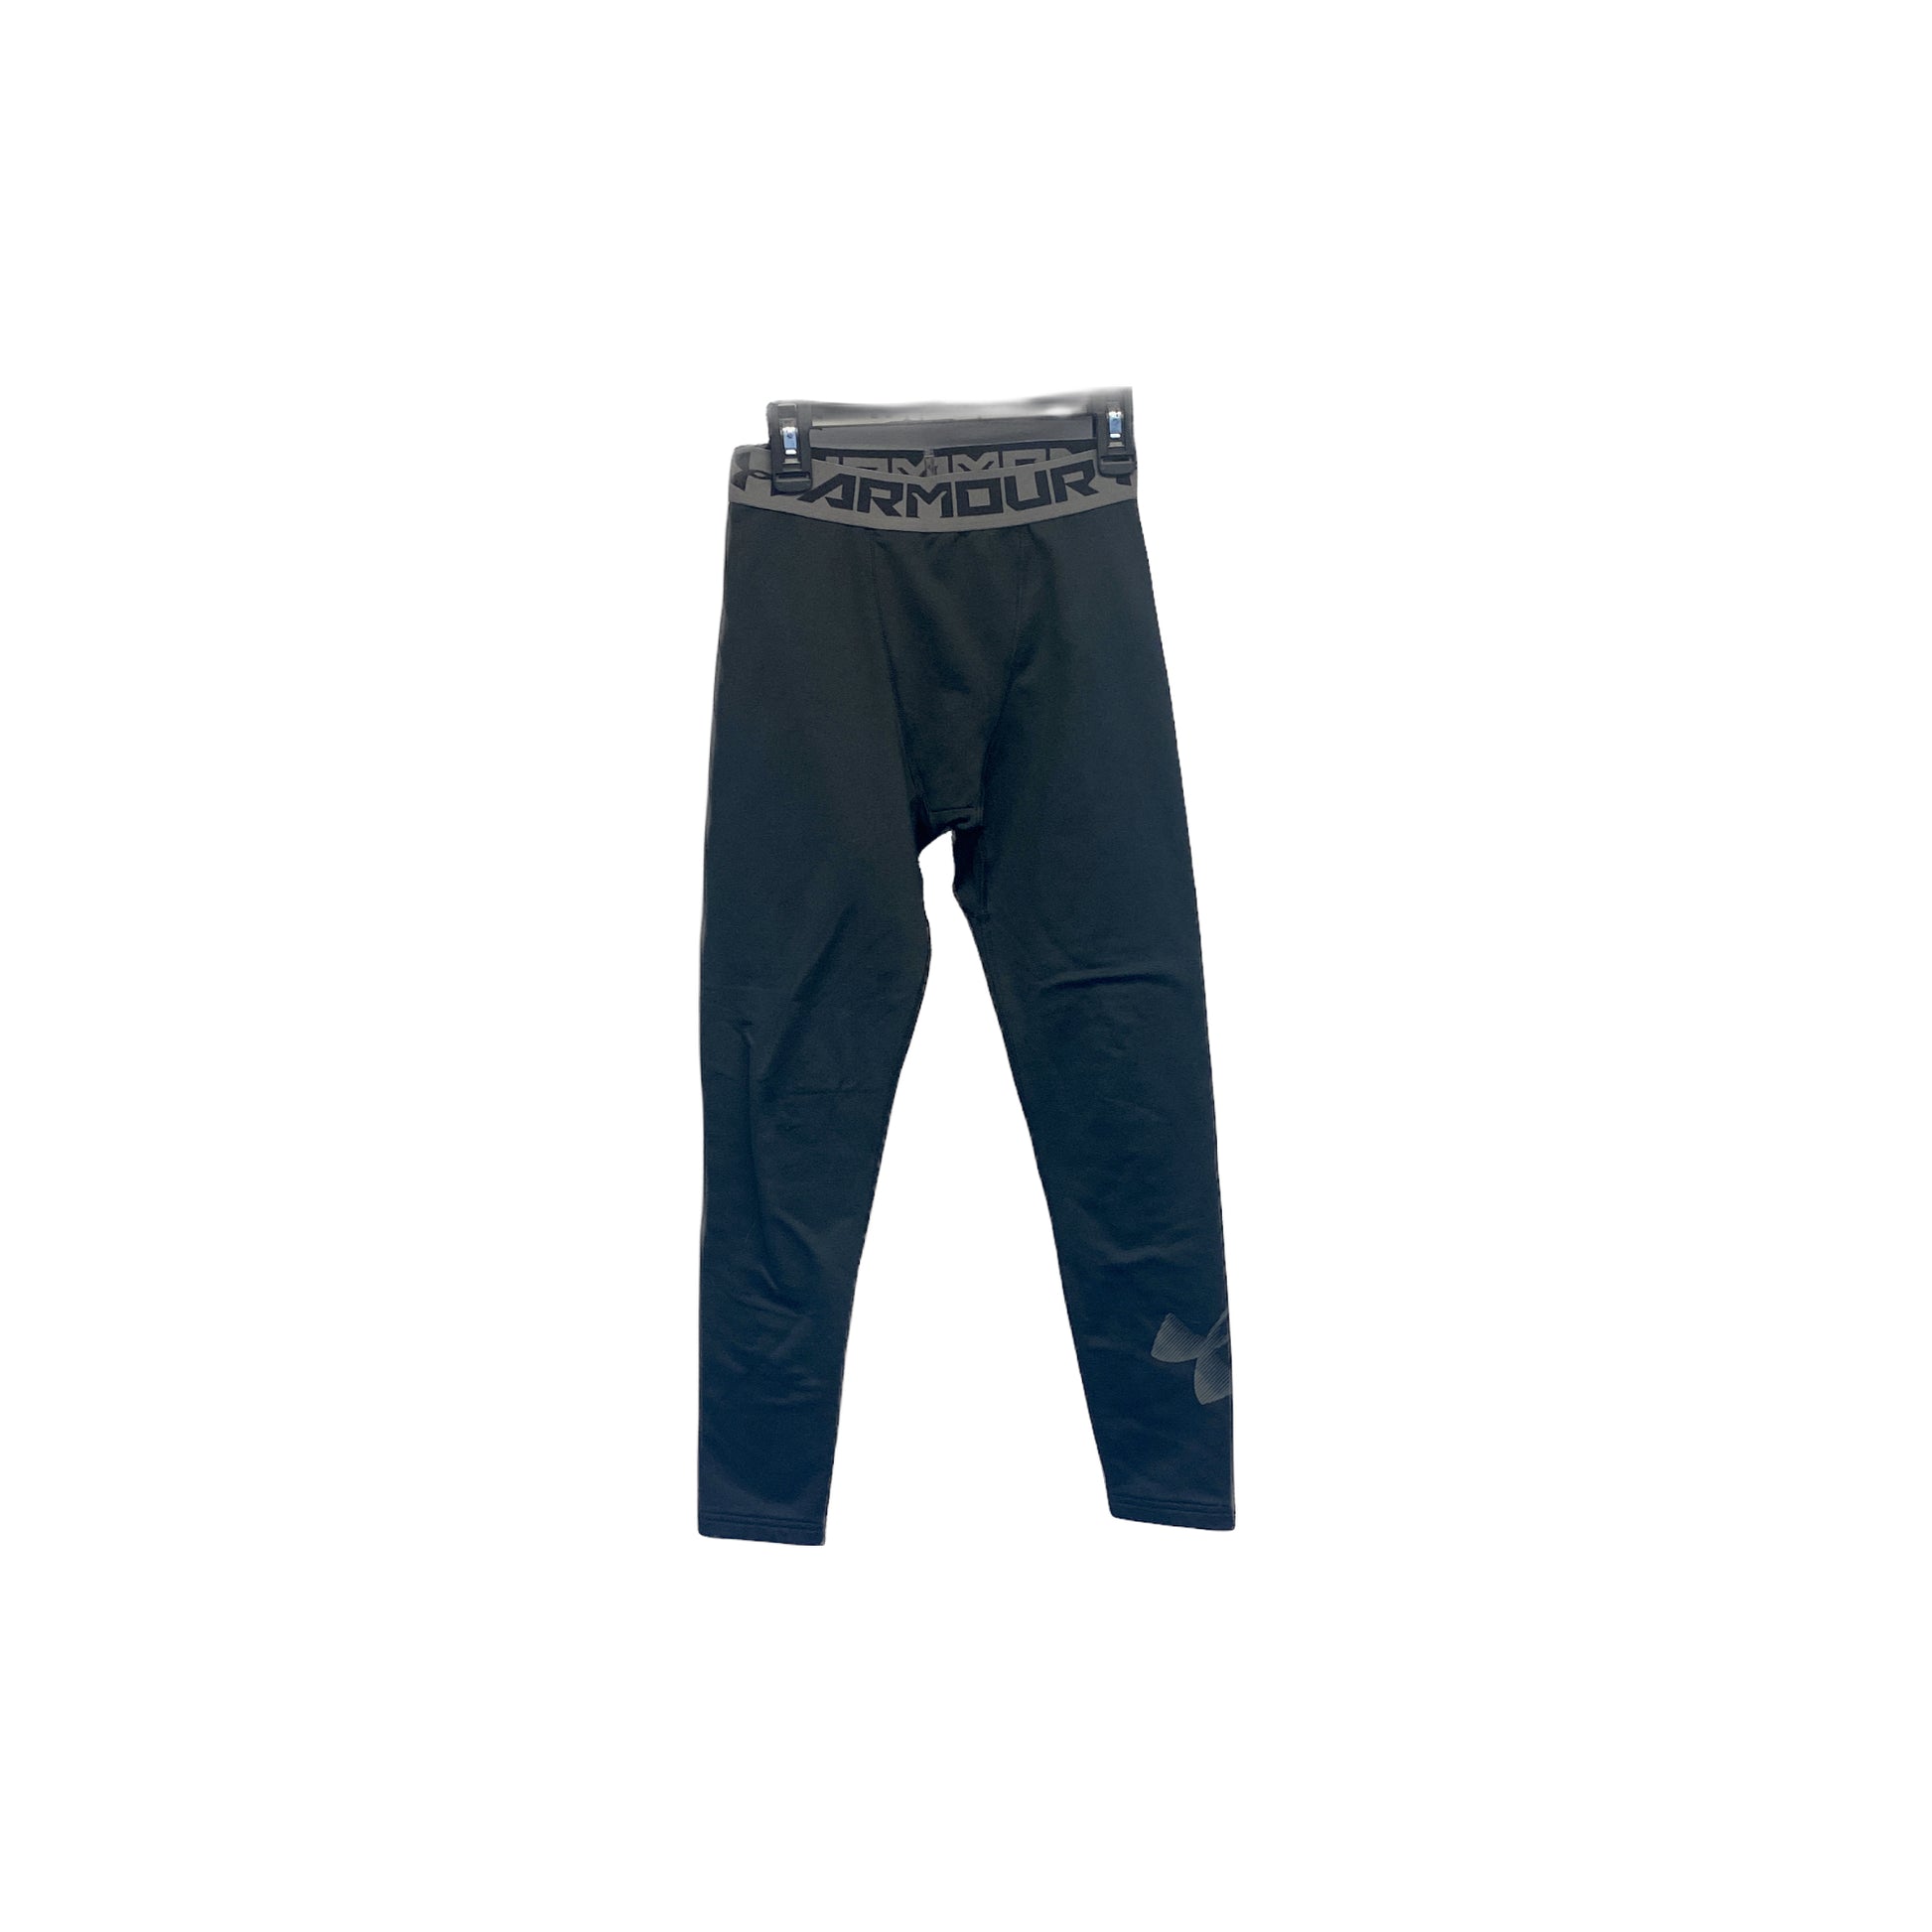 Under Armour Coldgear fitted pants